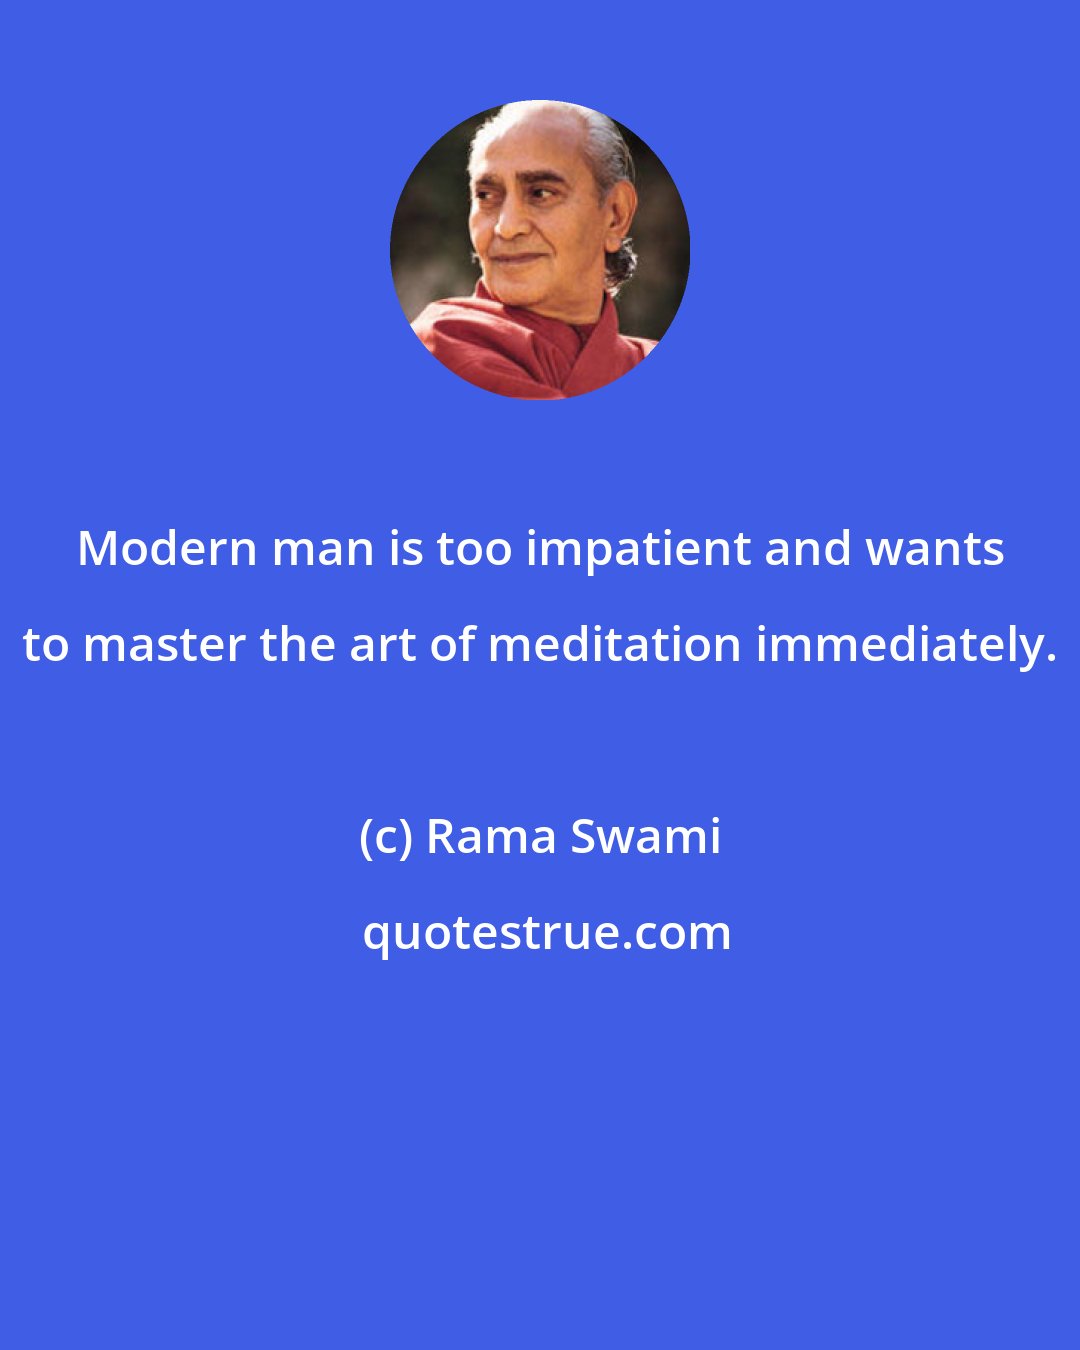 Rama Swami: Modern man is too impatient and wants to master the art of meditation immediately.